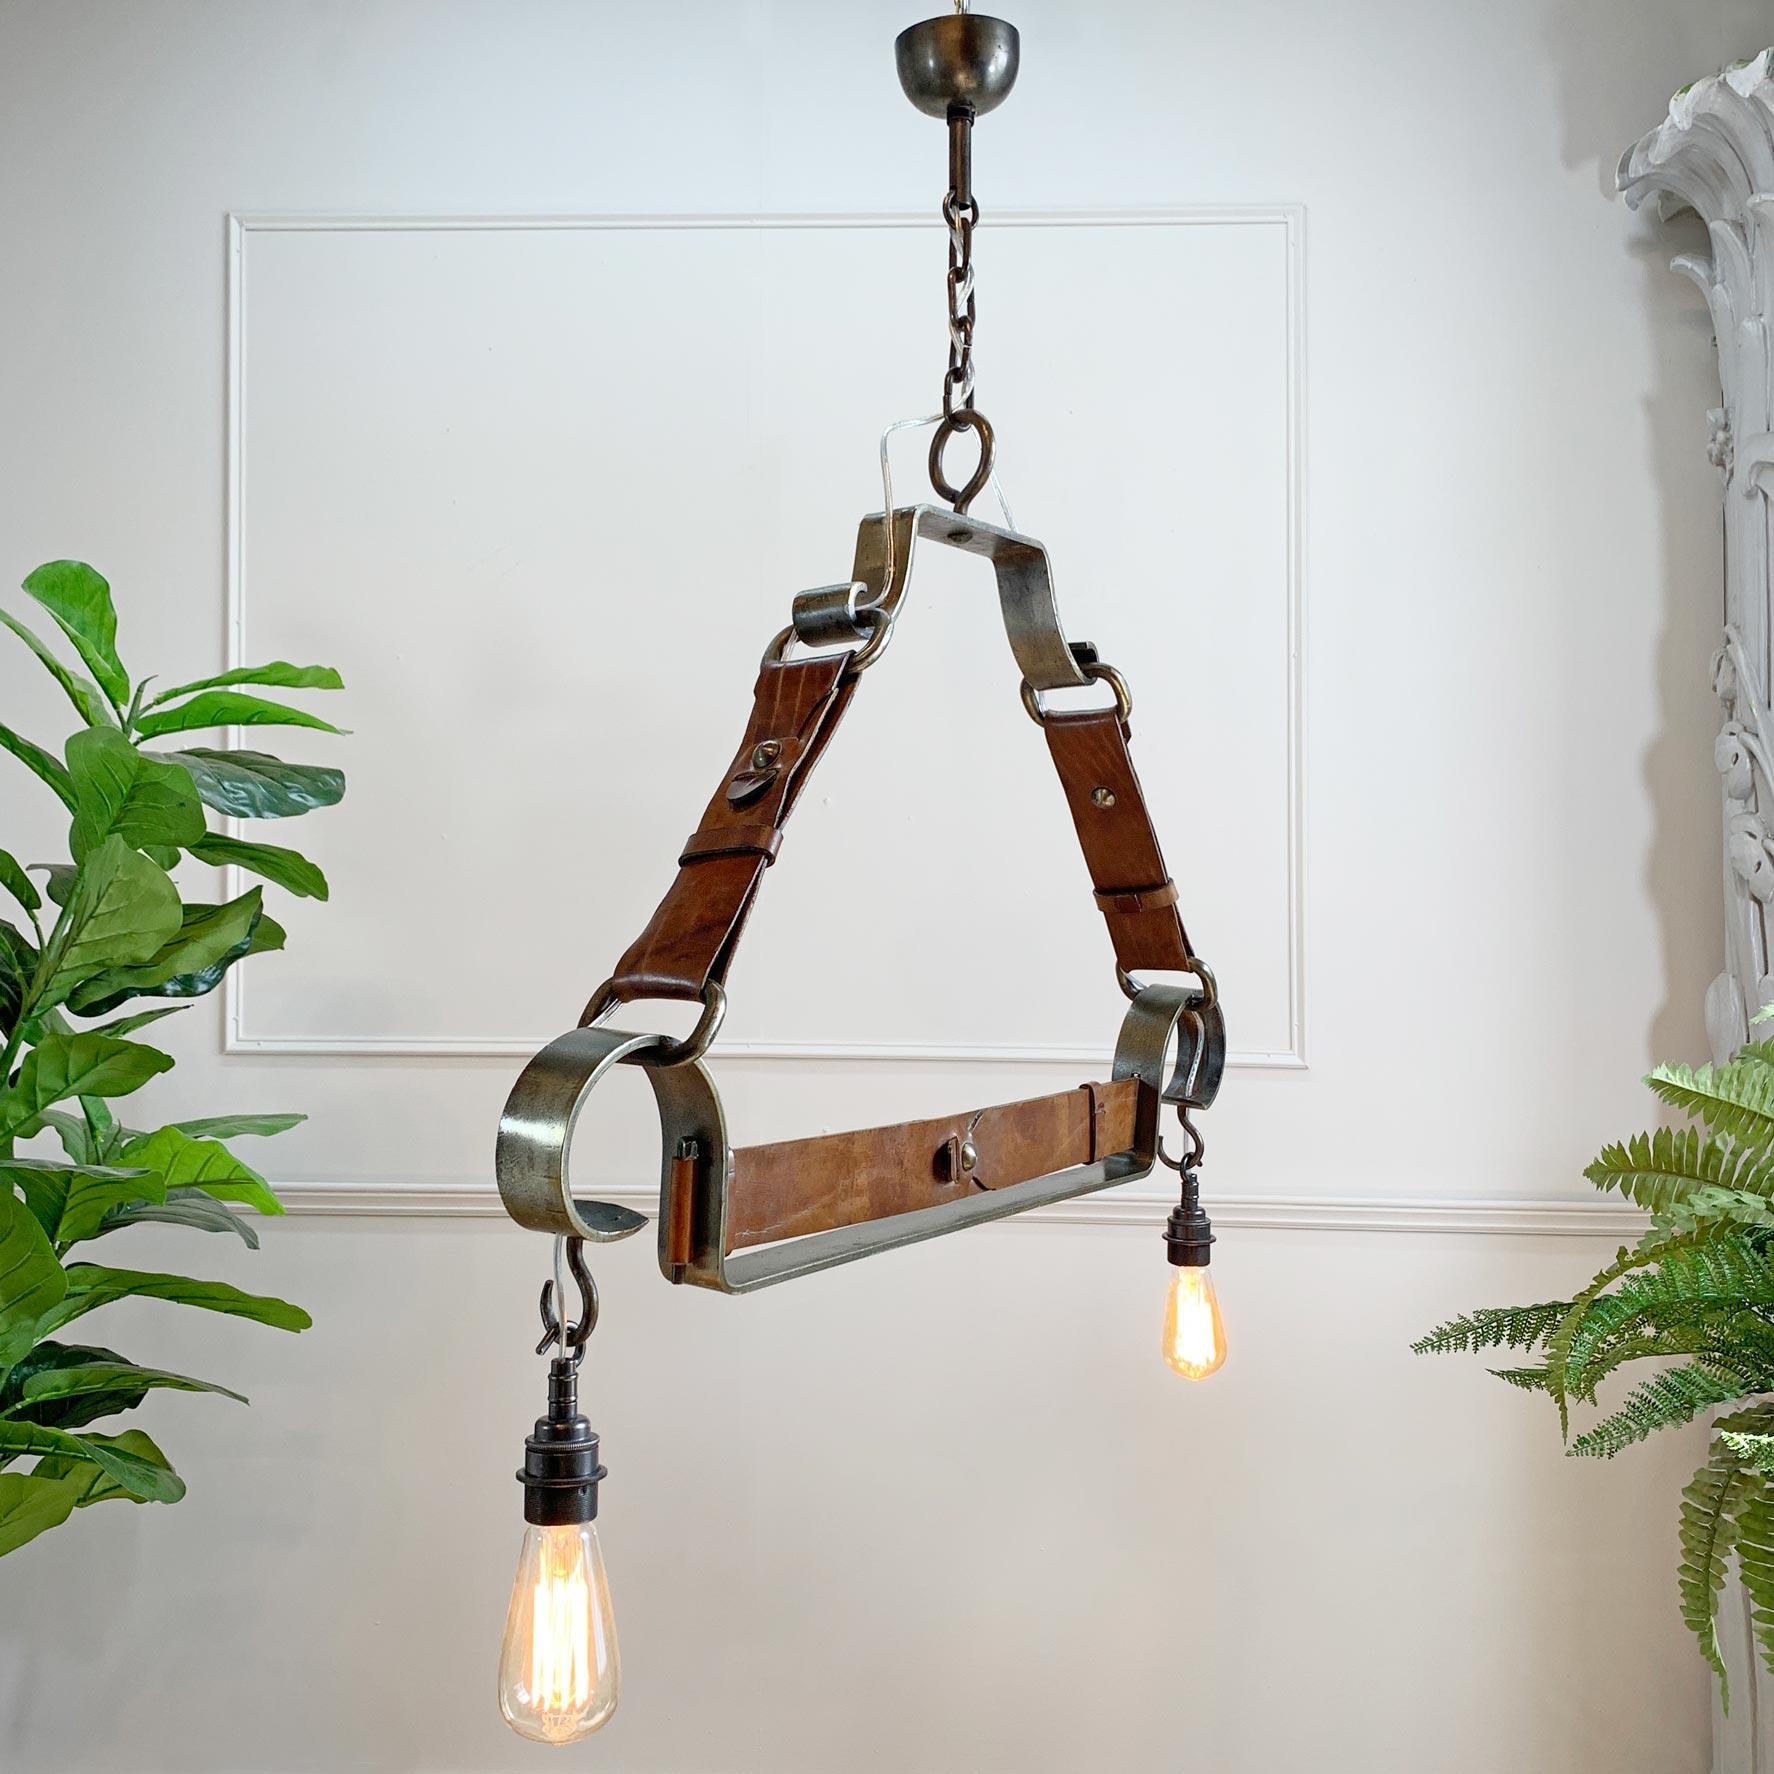 French Jean-Pierre Ryckaert Tan Leather Strap and Steel Ceiling Pendant Light For Sale